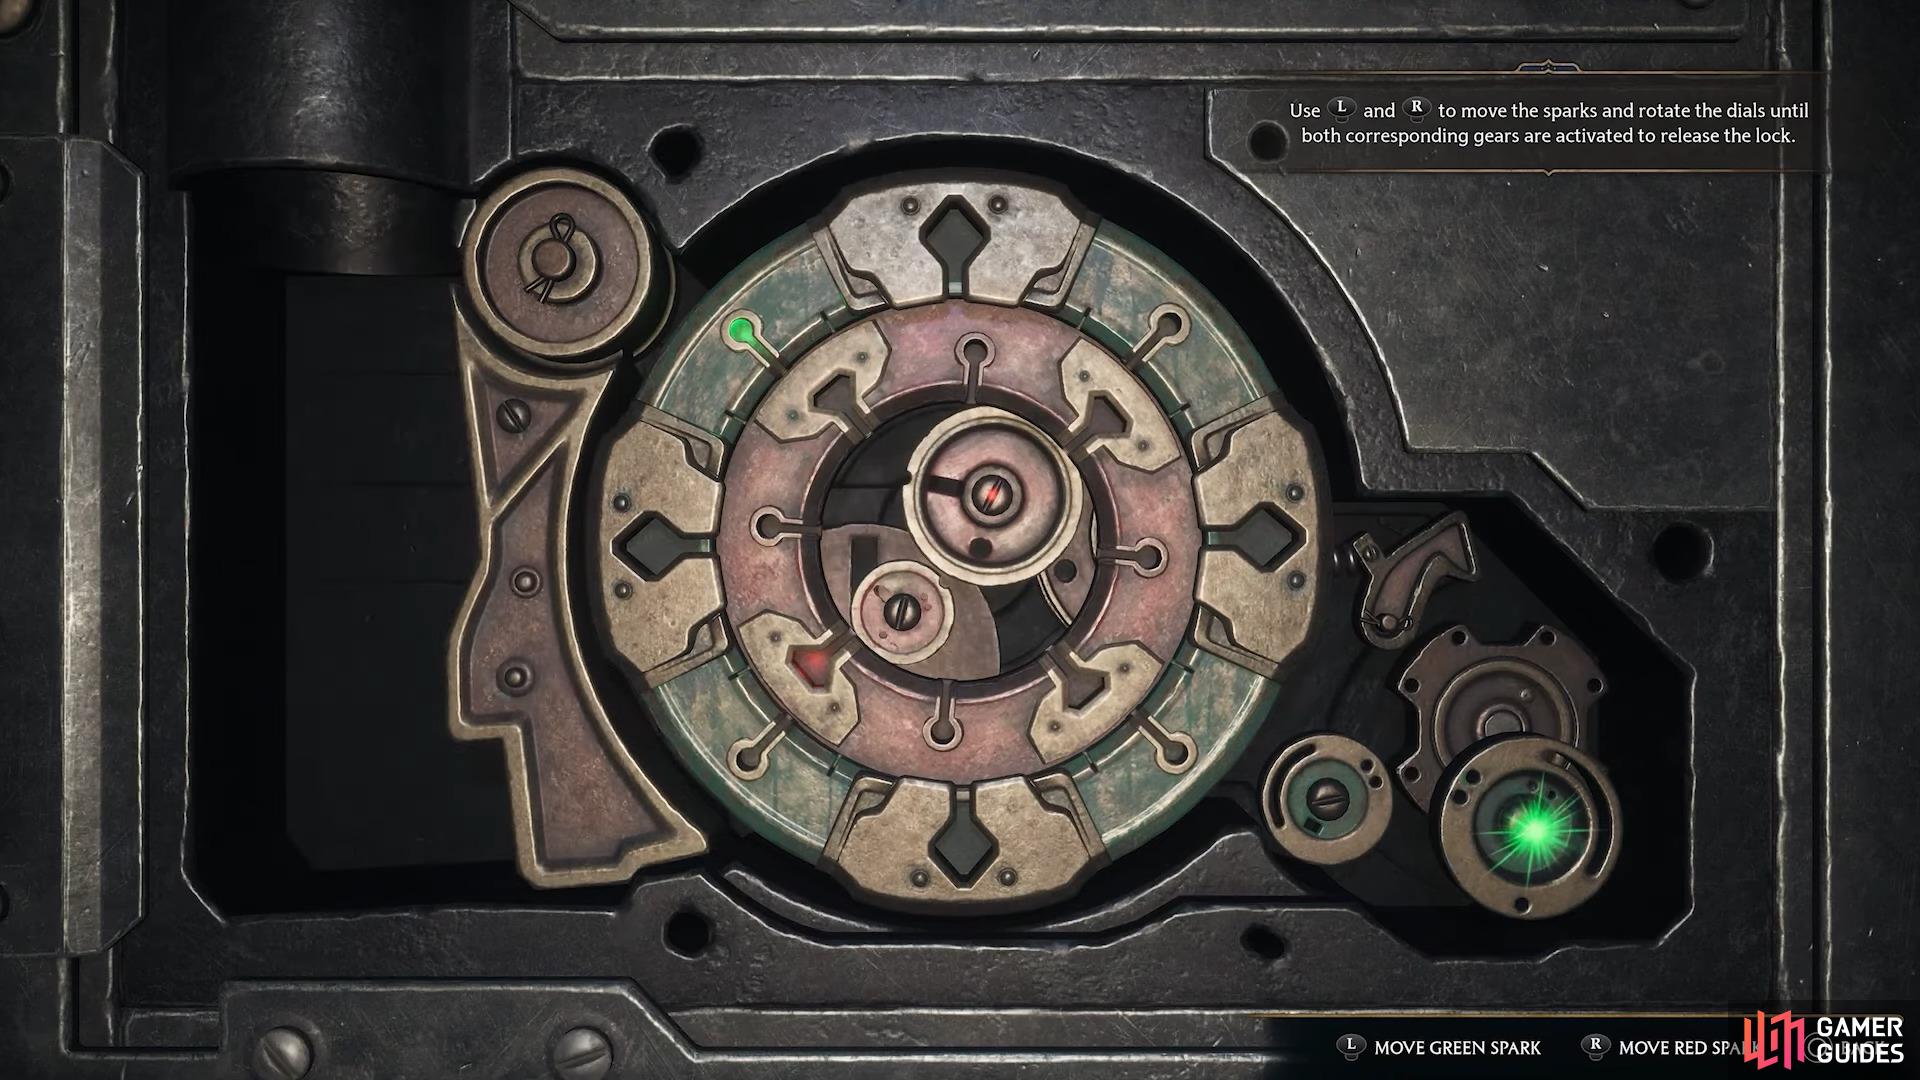 Once the cogs start spinning, Wizards will successfully open the lock on the left and be able to access.